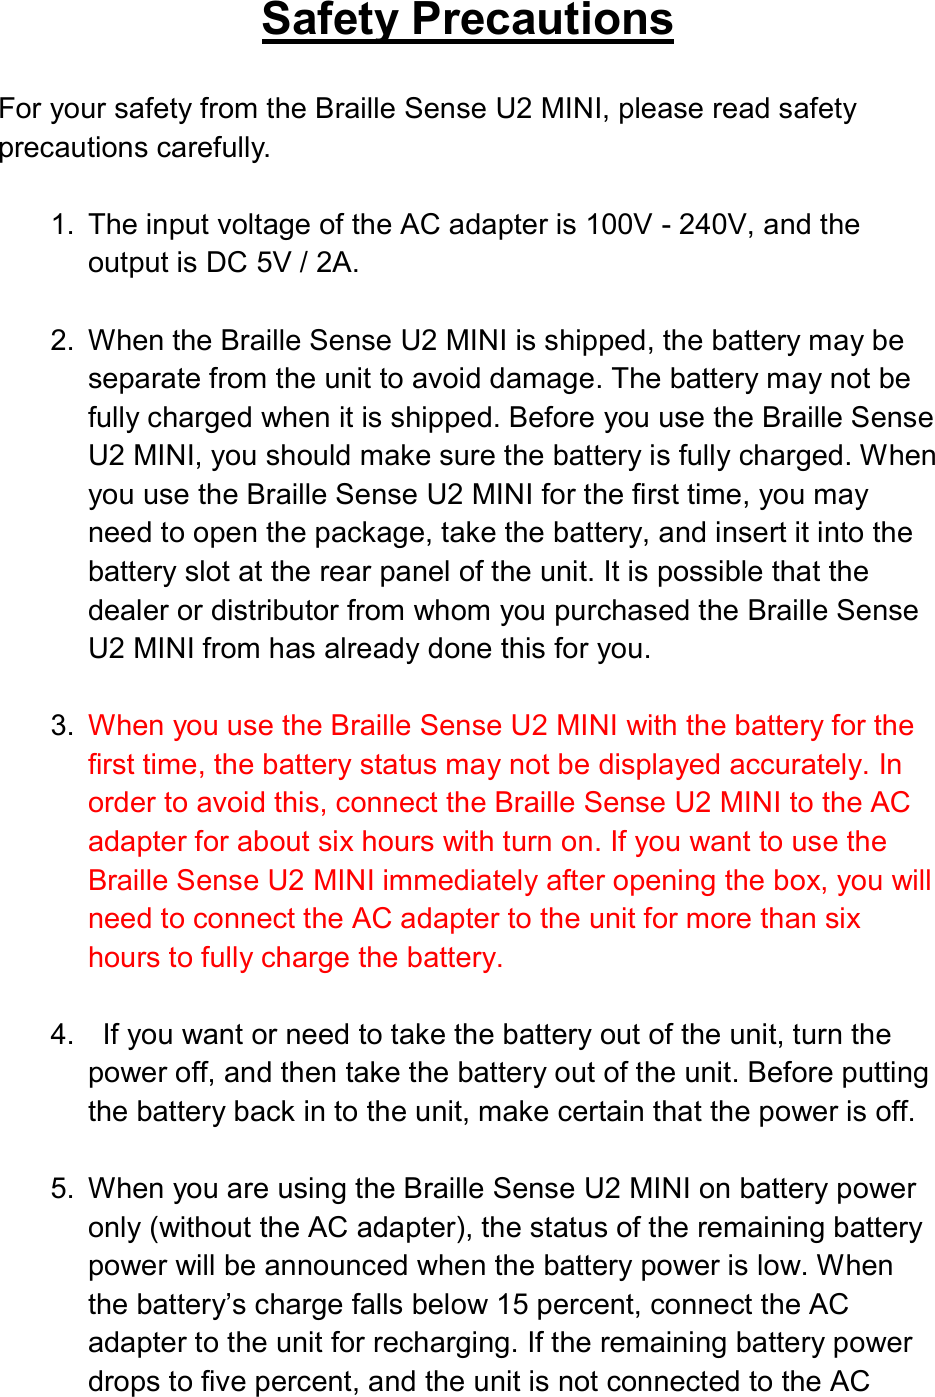  Safety Precautions  For your safety from the Braille Sense U2 MINI, please read safety precautions carefully.  1.  The input voltage of the AC adapter is 100V - 240V, and the output is DC 5V / 2A.  2.  When the Braille Sense U2 MINI is shipped, the battery may be separate from the unit to avoid damage. The battery may not be fully charged when it is shipped. Before you use the Braille Sense U2 MINI, you should make sure the battery is fully charged. When you use the Braille Sense U2 MINI for the first time, you may need to open the package, take the battery, and insert it into the battery slot at the rear panel of the unit. It is possible that the dealer or distributor from whom you purchased the Braille Sense U2 MINI from has already done this for you.  3.  When you use the Braille Sense U2 MINI with the battery for the first time, the battery status may not be displayed accurately. In order to avoid this, connect the Braille Sense U2 MINI to the AC adapter for about six hours with turn on. If you want to use the Braille Sense U2 MINI immediately after opening the box, you will need to connect the AC adapter to the unit for more than six hours to fully charge the battery.  4.    If you want or need to take the battery out of the unit, turn the power off, and then take the battery out of the unit. Before putting the battery back in to the unit, make certain that the power is off.  5.  When you are using the Braille Sense U2 MINI on battery power only (without the AC adapter), the status of the remaining battery power will be announced when the battery power is low. When the battery’s charge falls below 15 percent, connect the AC adapter to the unit for recharging. If the remaining battery power drops to five percent, and the unit is not connected to the AC 